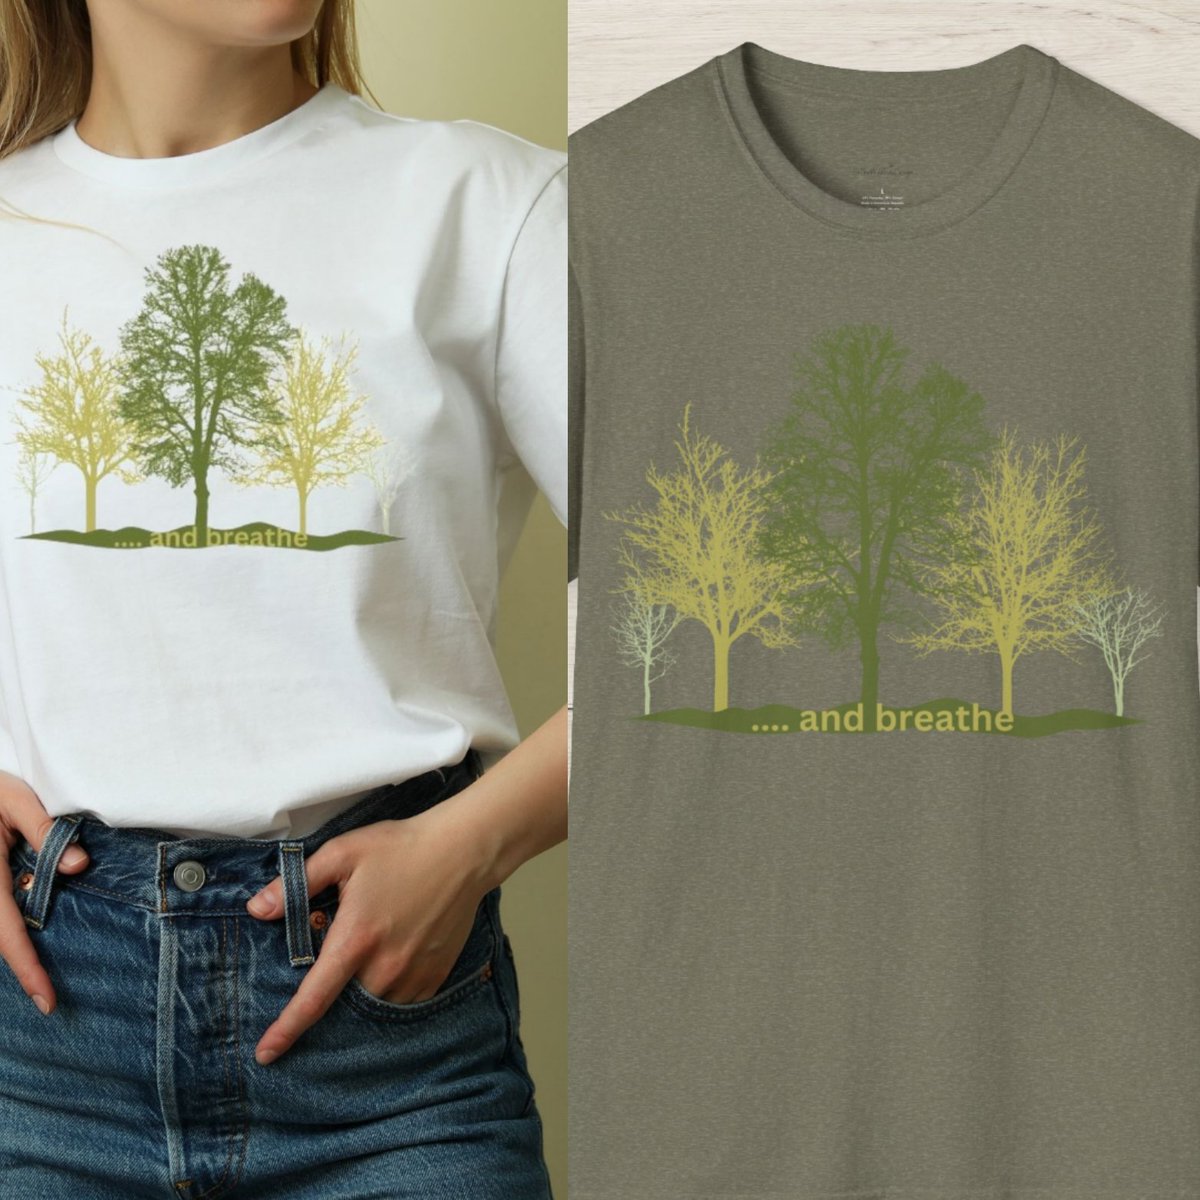 Now and then we need to remind ourselves to breathe and slow down onthewildsidedesign.etsy.com #MentalHealthMatters #shopindie